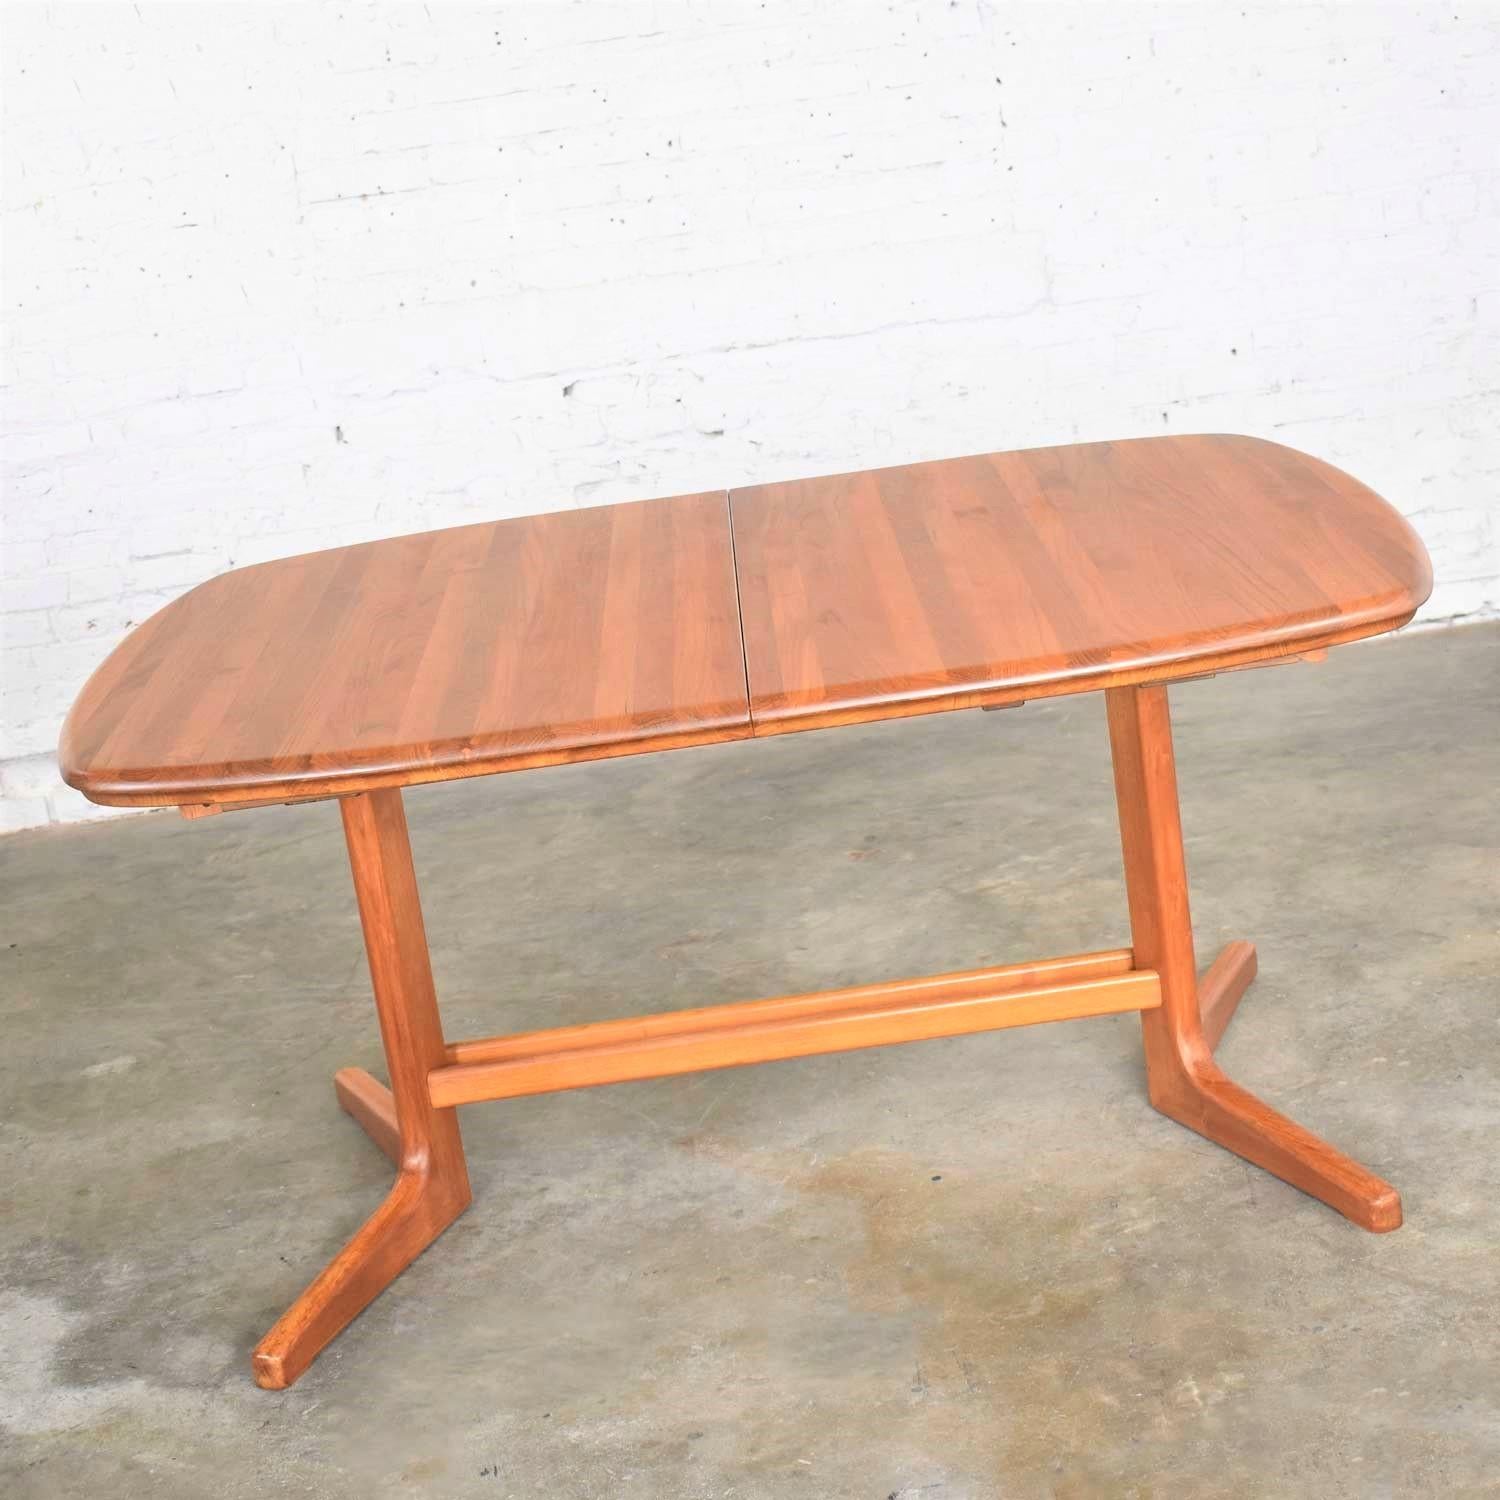 Handsome Scandinavian Modern oval expanding dining table in teak with 2 leaves and attributed to Dyrlund. It is in fabulous vintage condition. The top, including the leaves, has been completely and expertly refinished and the base finish has been